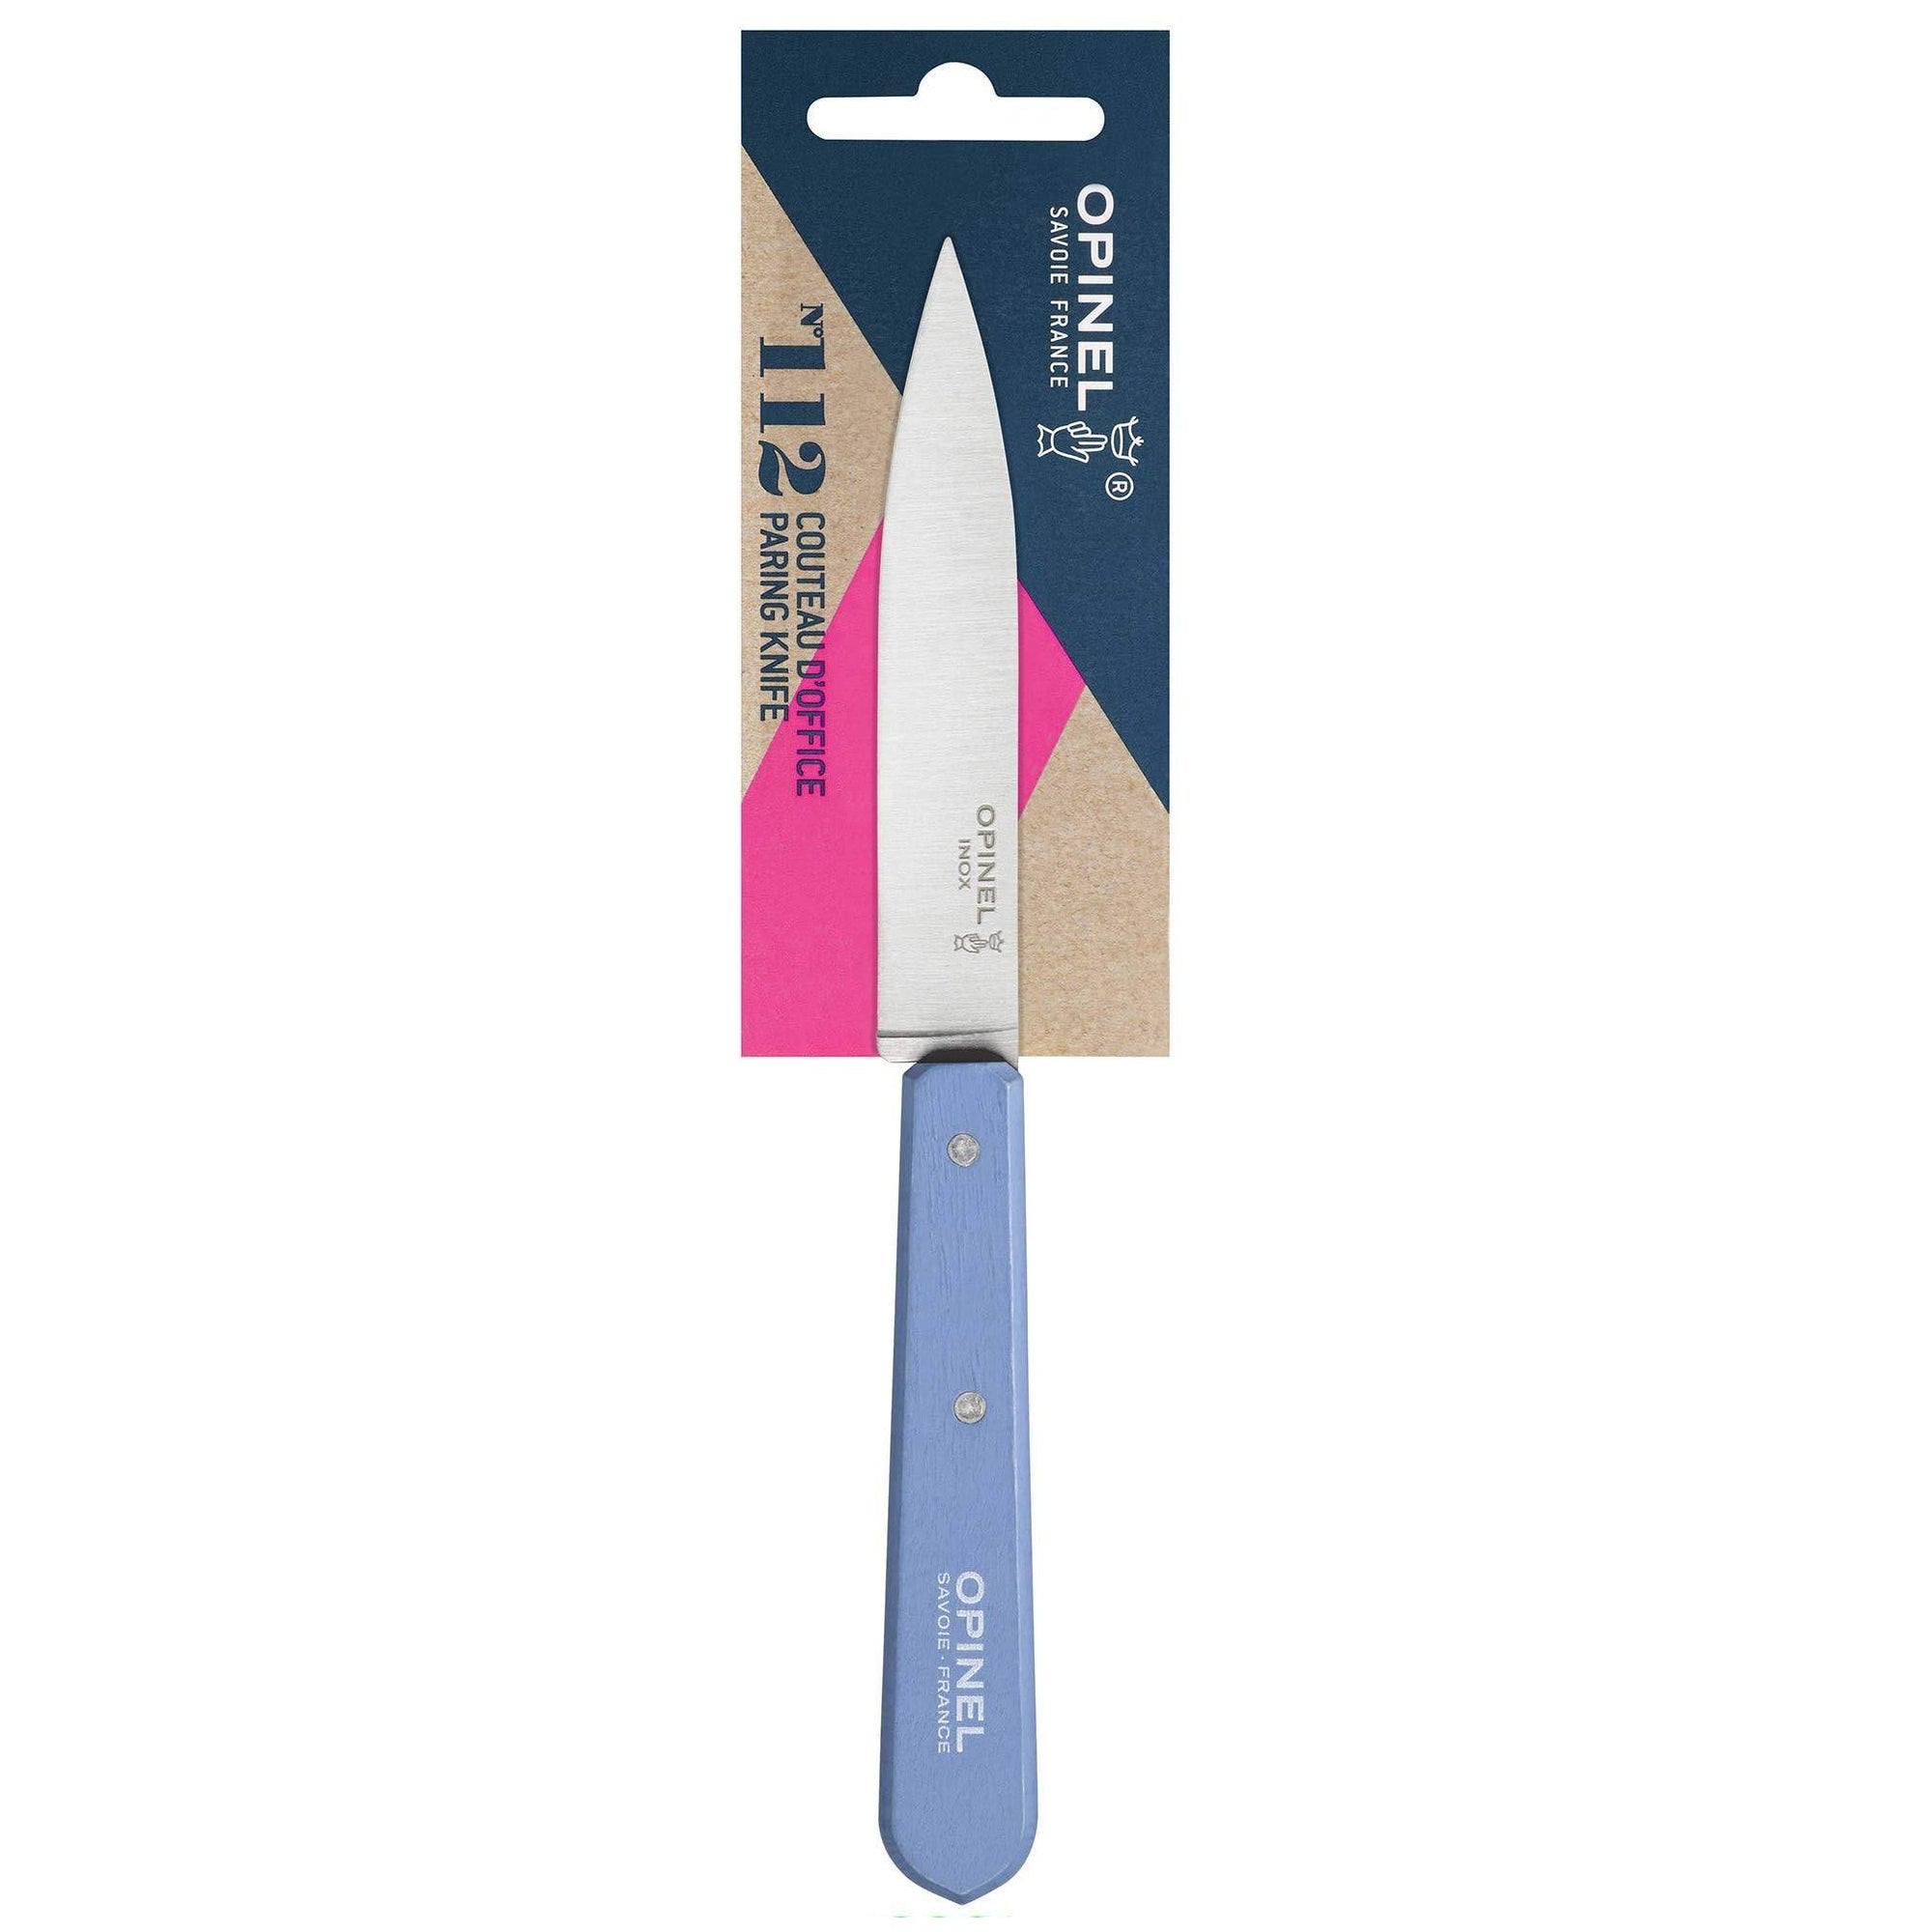 Opinel No. 112 Paring Knives, Set of 2